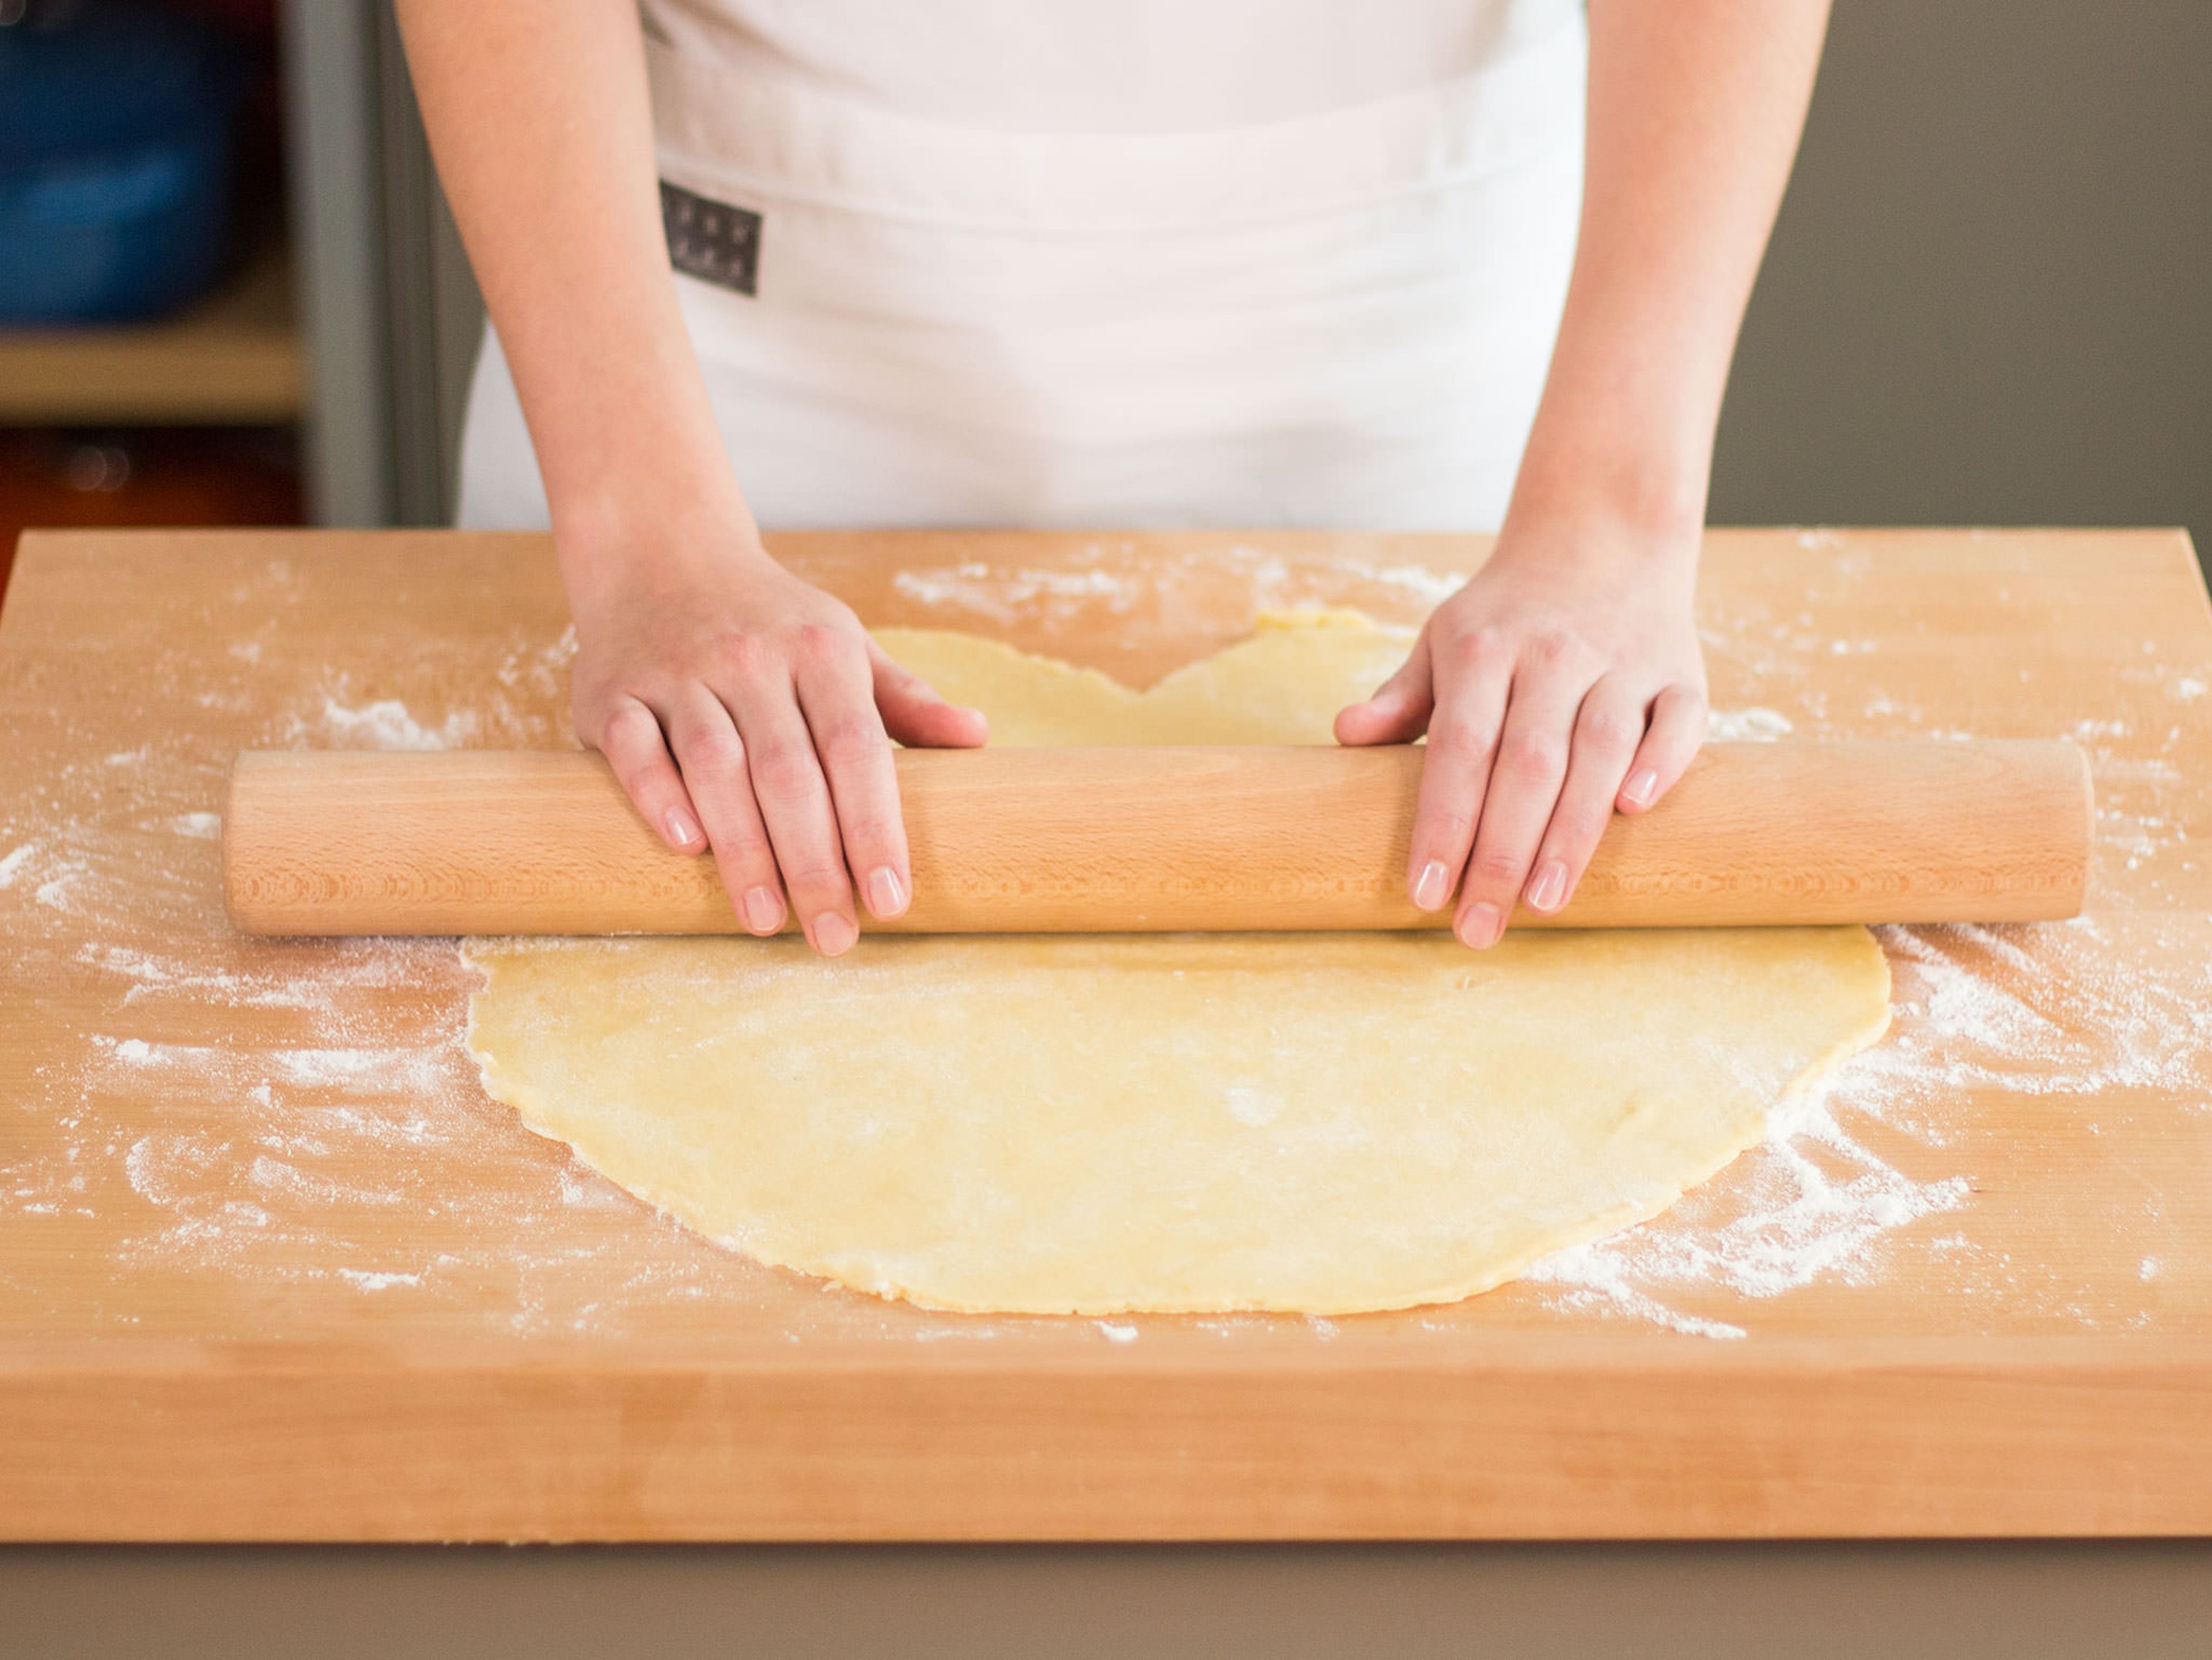 Preheat oven to 180°C/350°F. Cut dough into two even rounds. Then, flour work surface, place dough on top, and roll out, one at a time, using a rolling pin until rounds are larger than your pie dish.